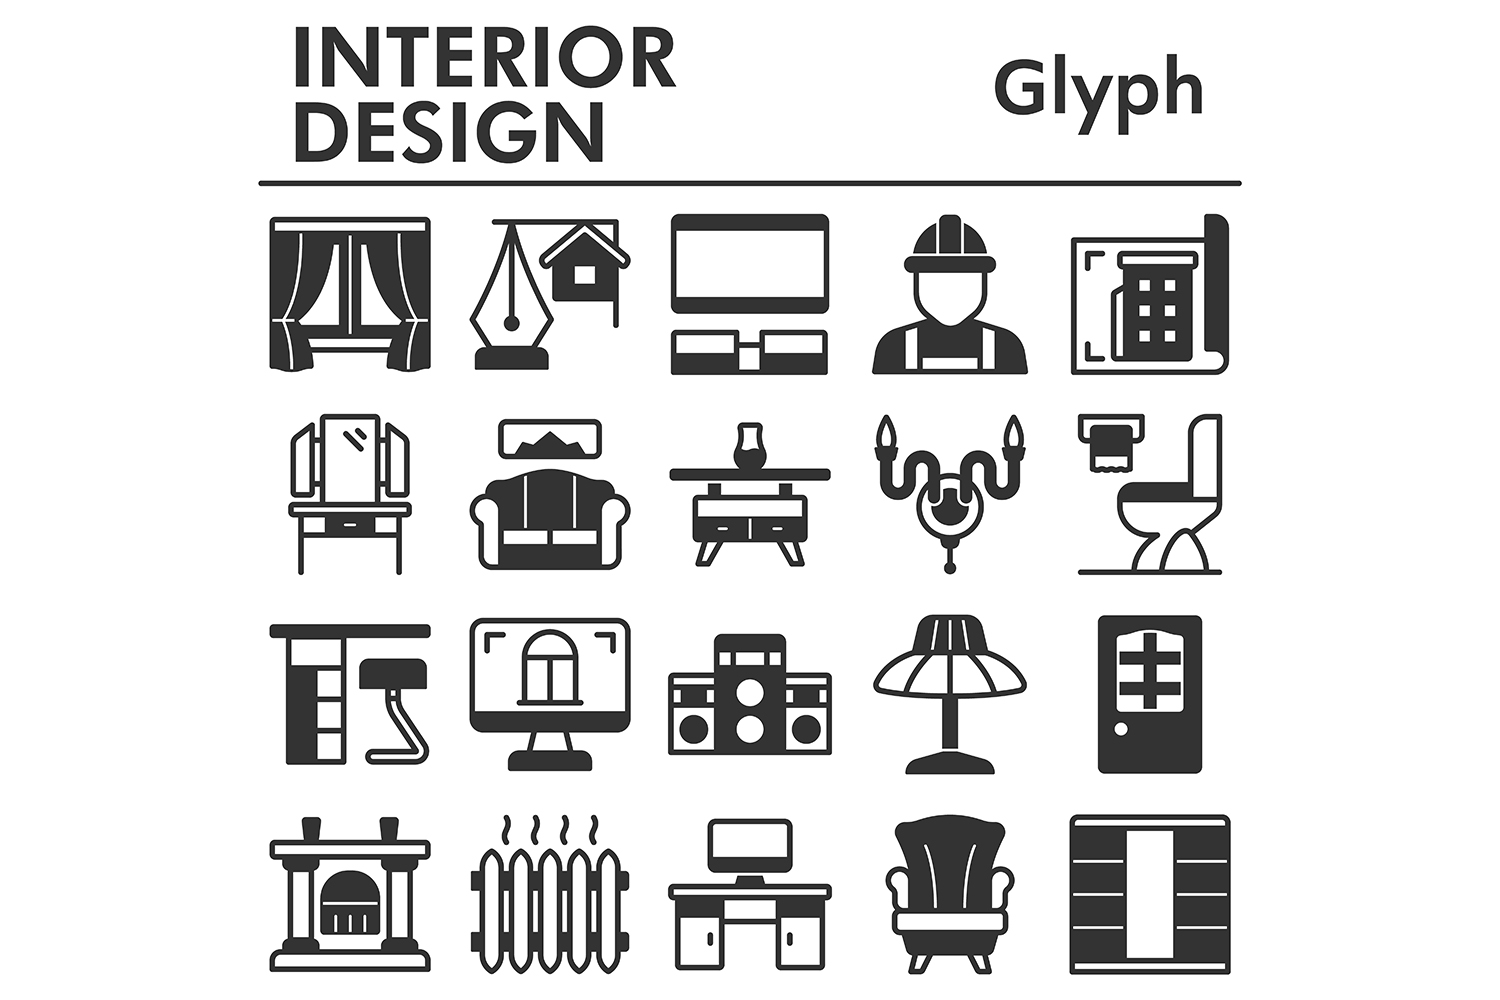 Interior design icons set, glyph style pinterest preview image.